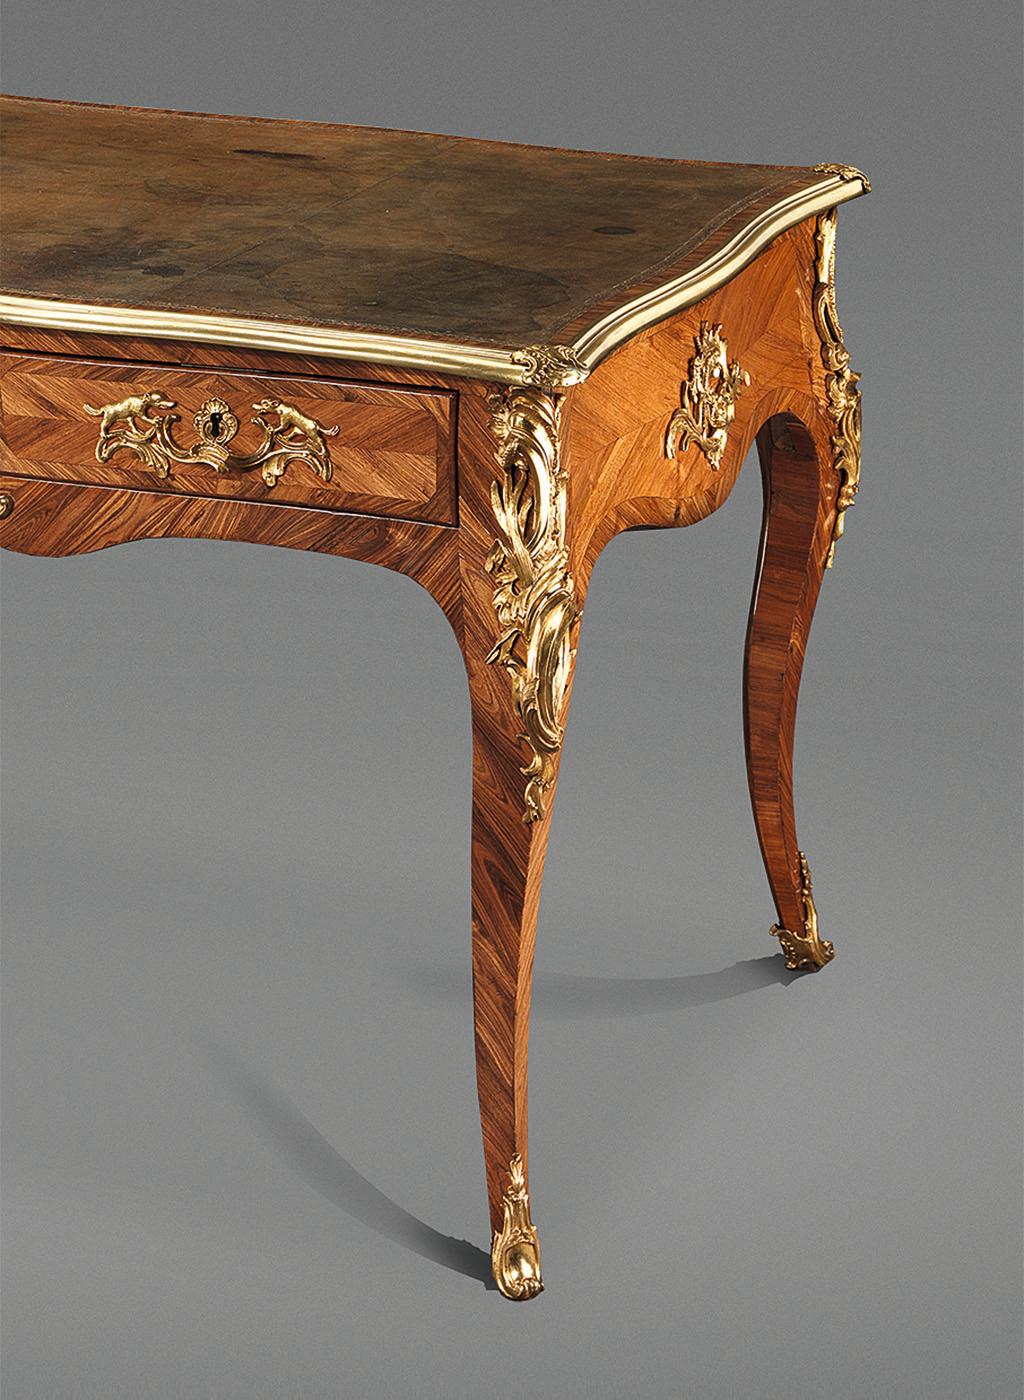 Paris, J.-B. Fromageau, c. 1760
Signed with the hallmark Jean-Baptiste Fromageau (born around 1720, active as a master craftsman since 1755).
Rosewood and kingwood veneered on oak, with the original fire-gilded, finely chiselled bronze fittings,